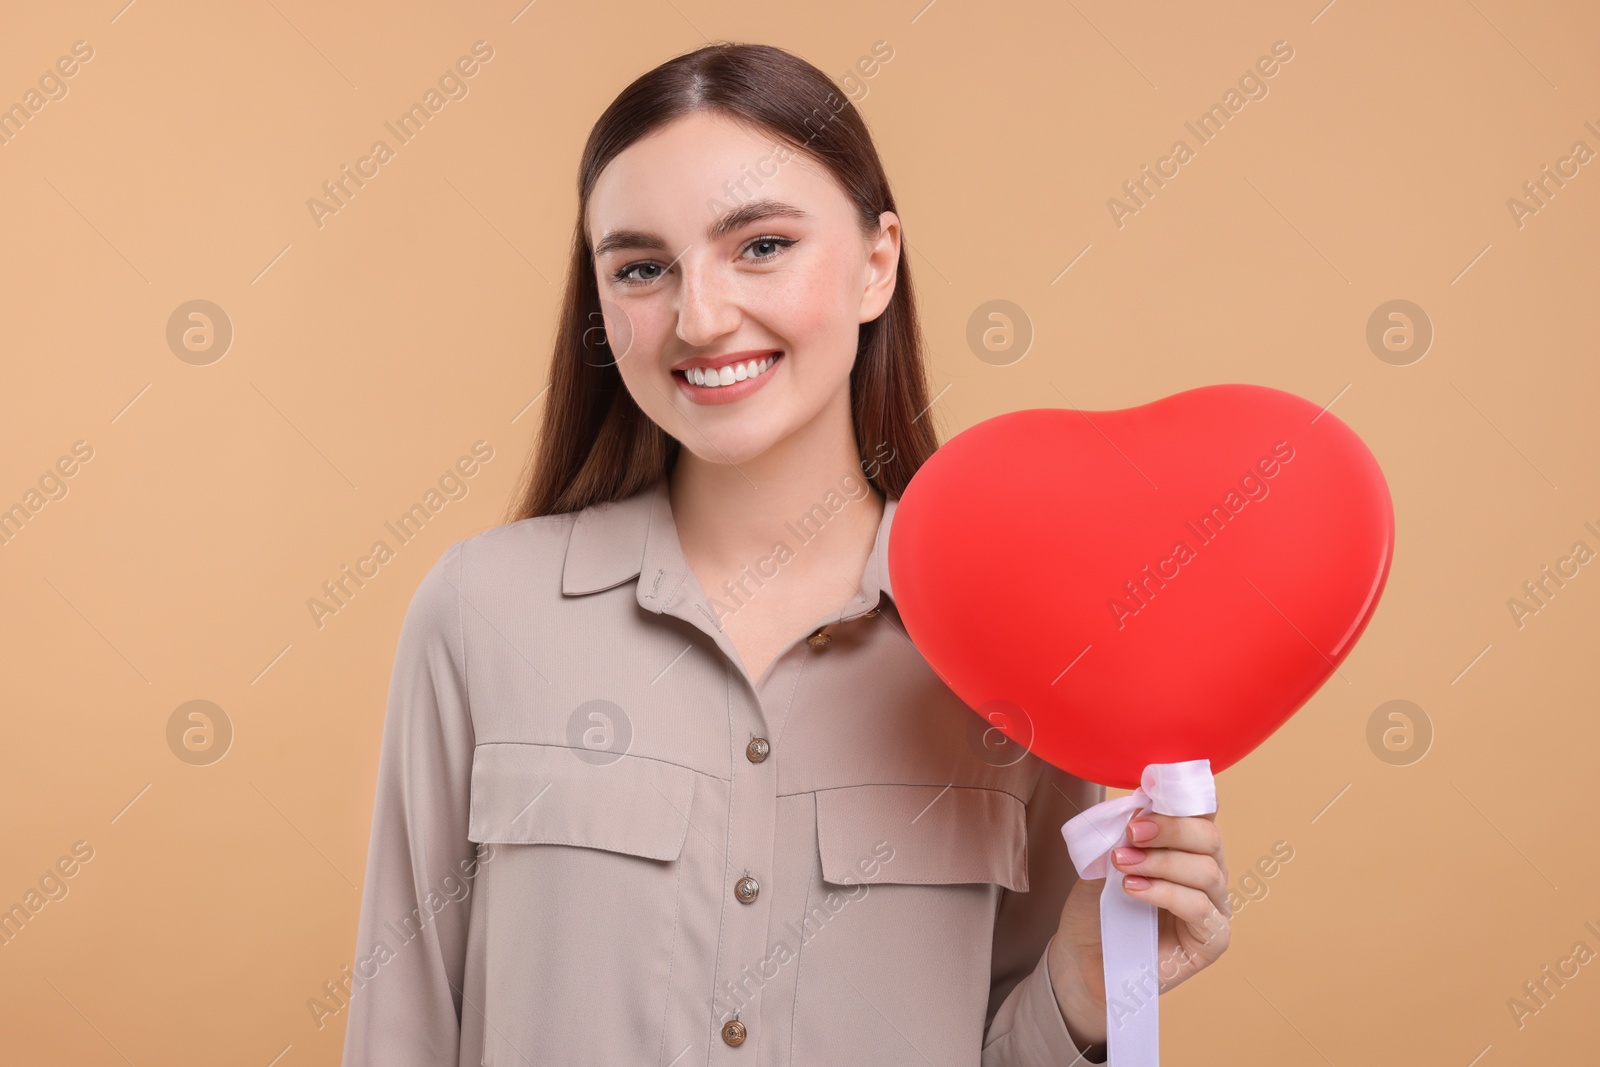 Photo of Smiling woman holding red heart shaped balloon on beige background